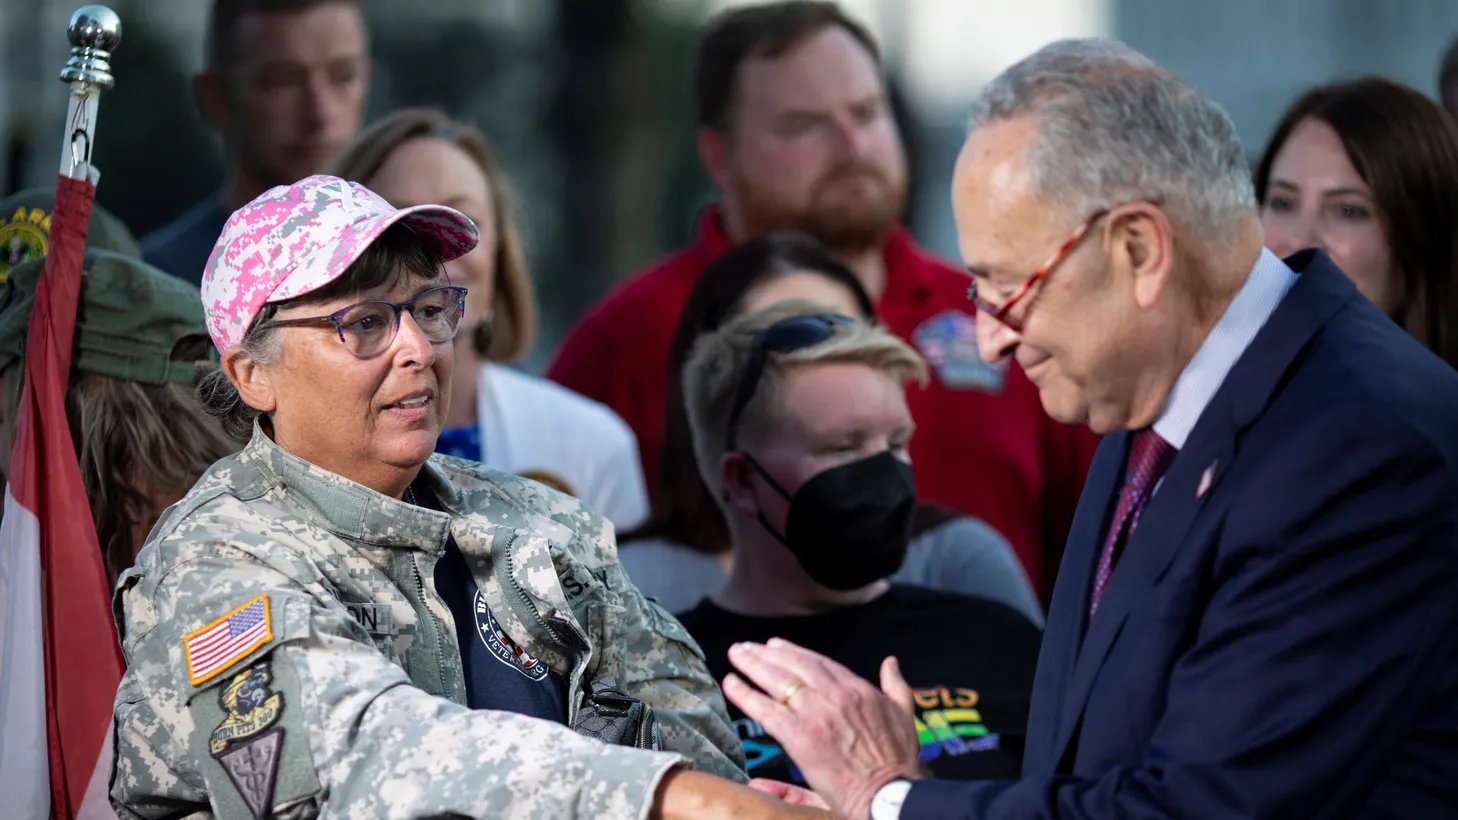 Senate Majority Leader Chuck Schumer (D-NY) embraces a veteran during a news conference, following the completion of a vote on the Promise to Address Comprehensive Toxics (PACT) Act on Capitol Hill in Washington, U.S., August 2, 2022.